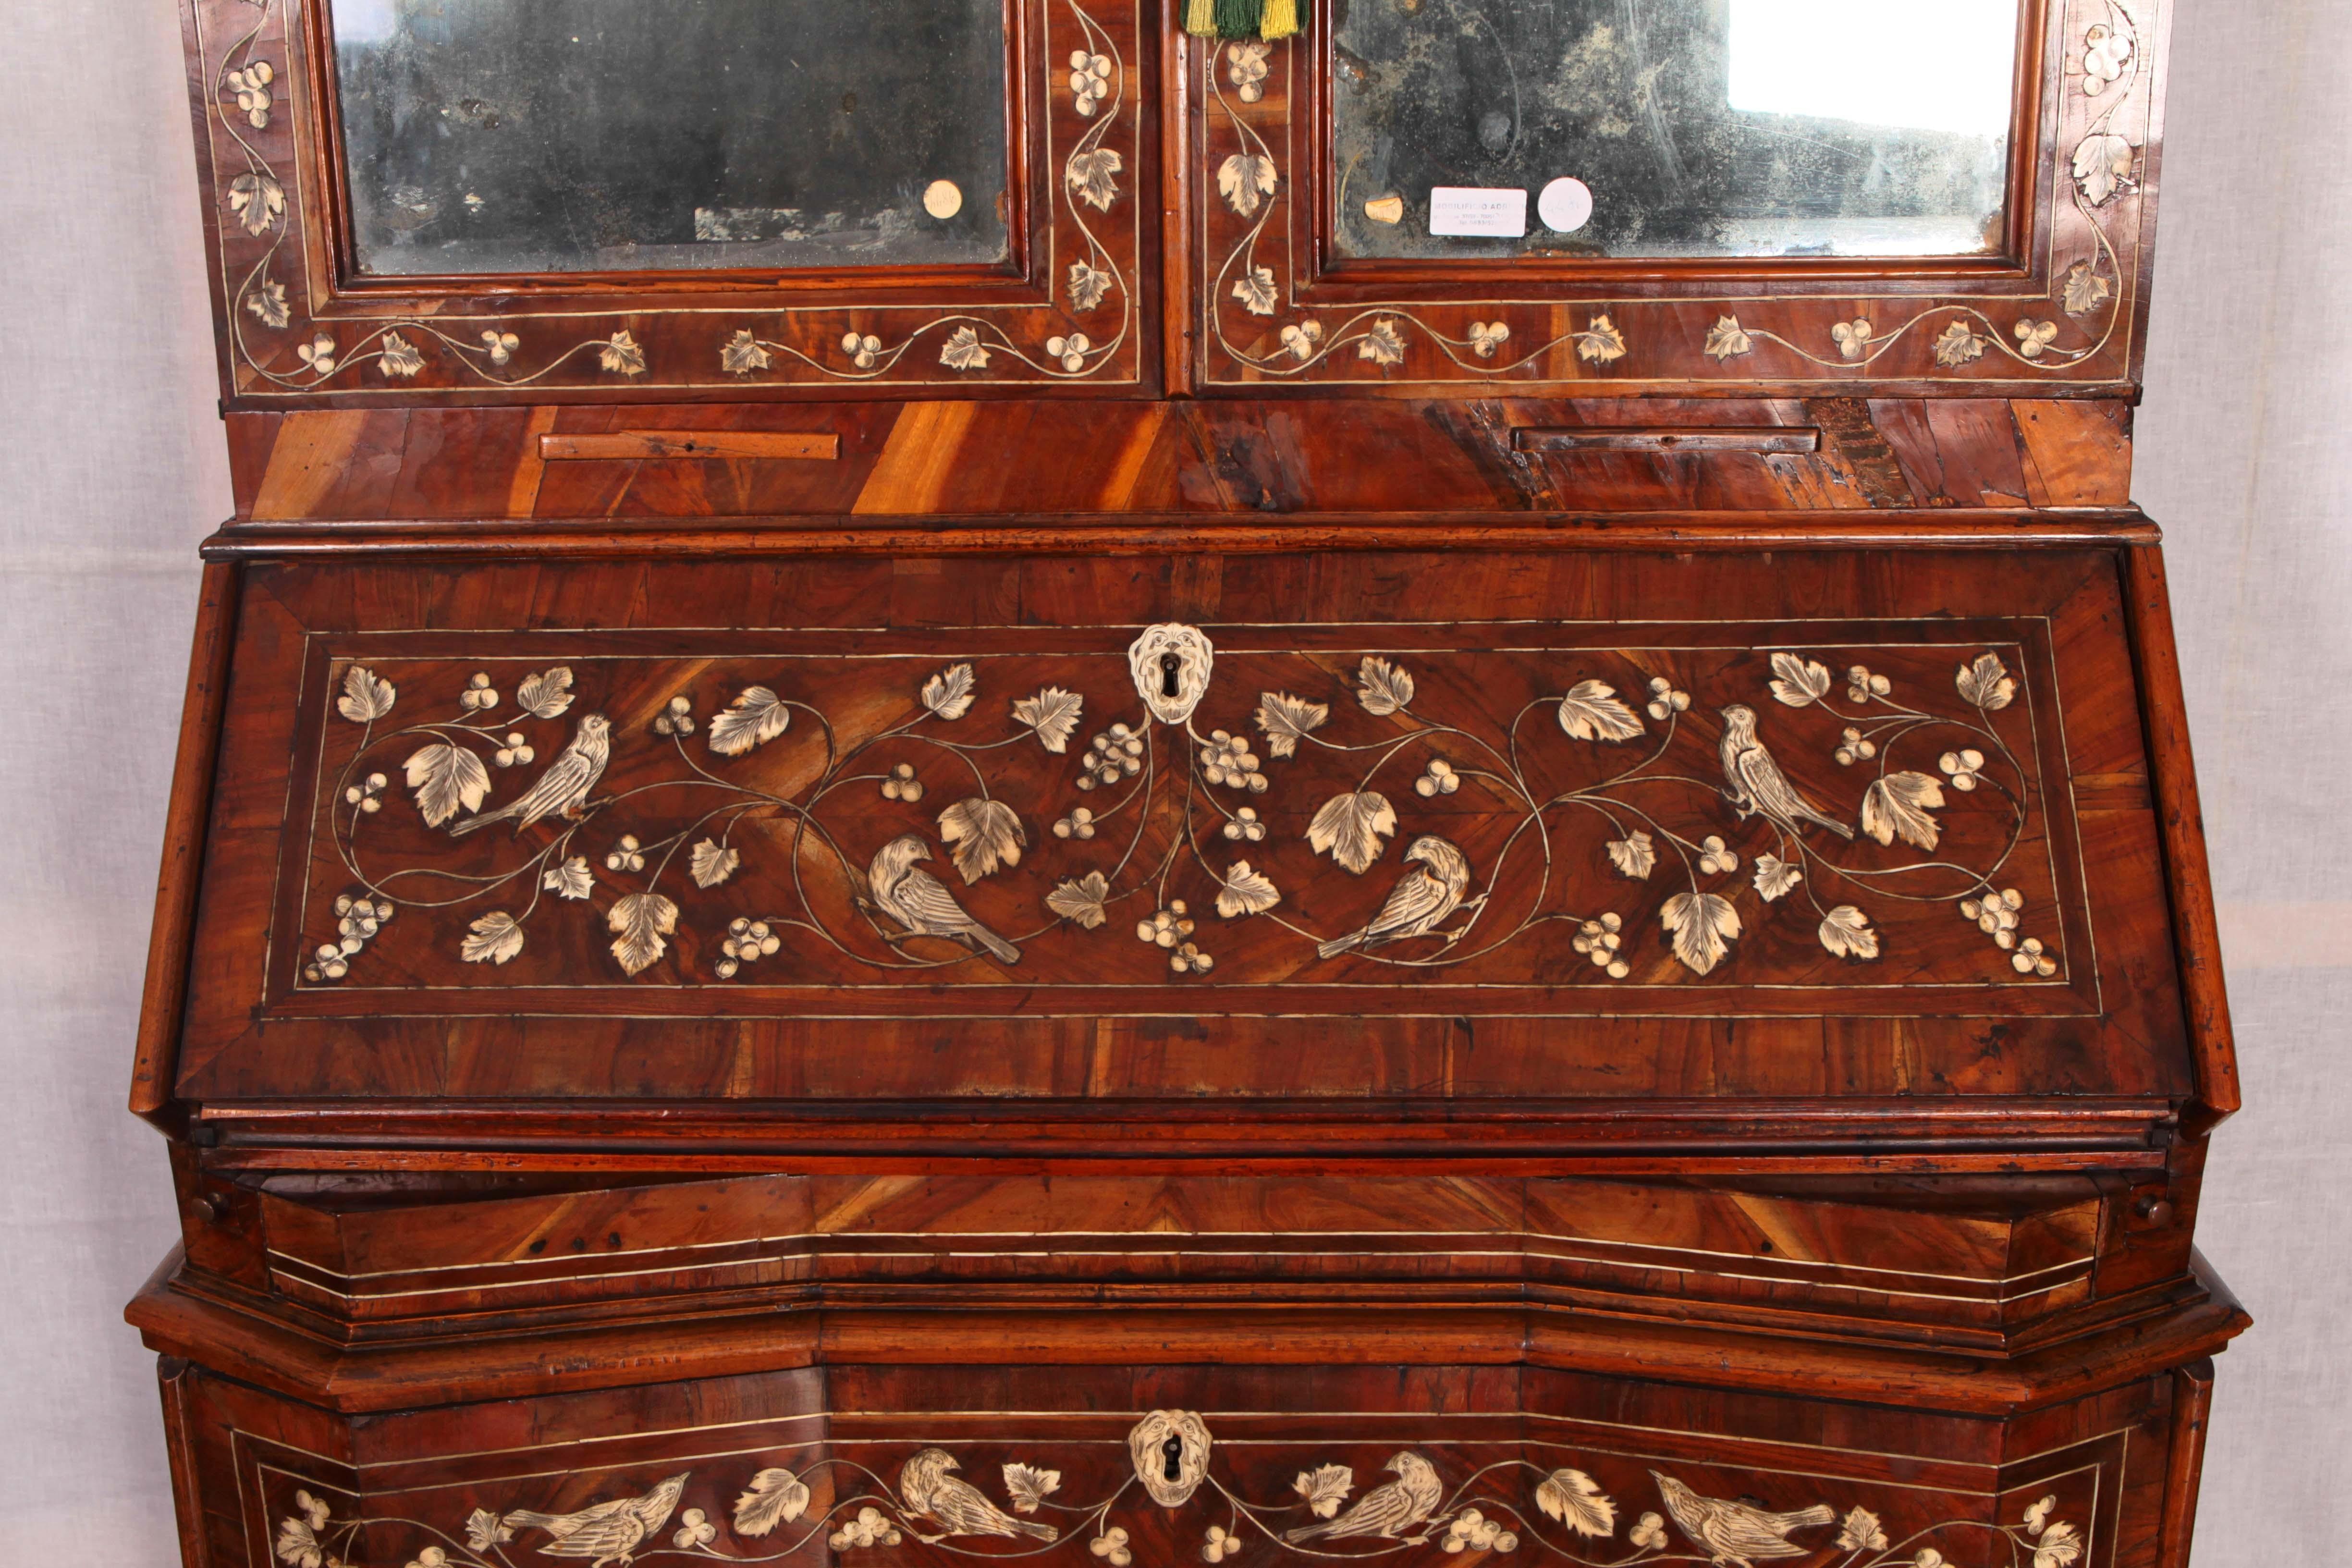 Precious Italian of 1700 'Lombard' Trumeau in Walnut Inlaid Ivory In Good Condition For Sale In Barletta, IT